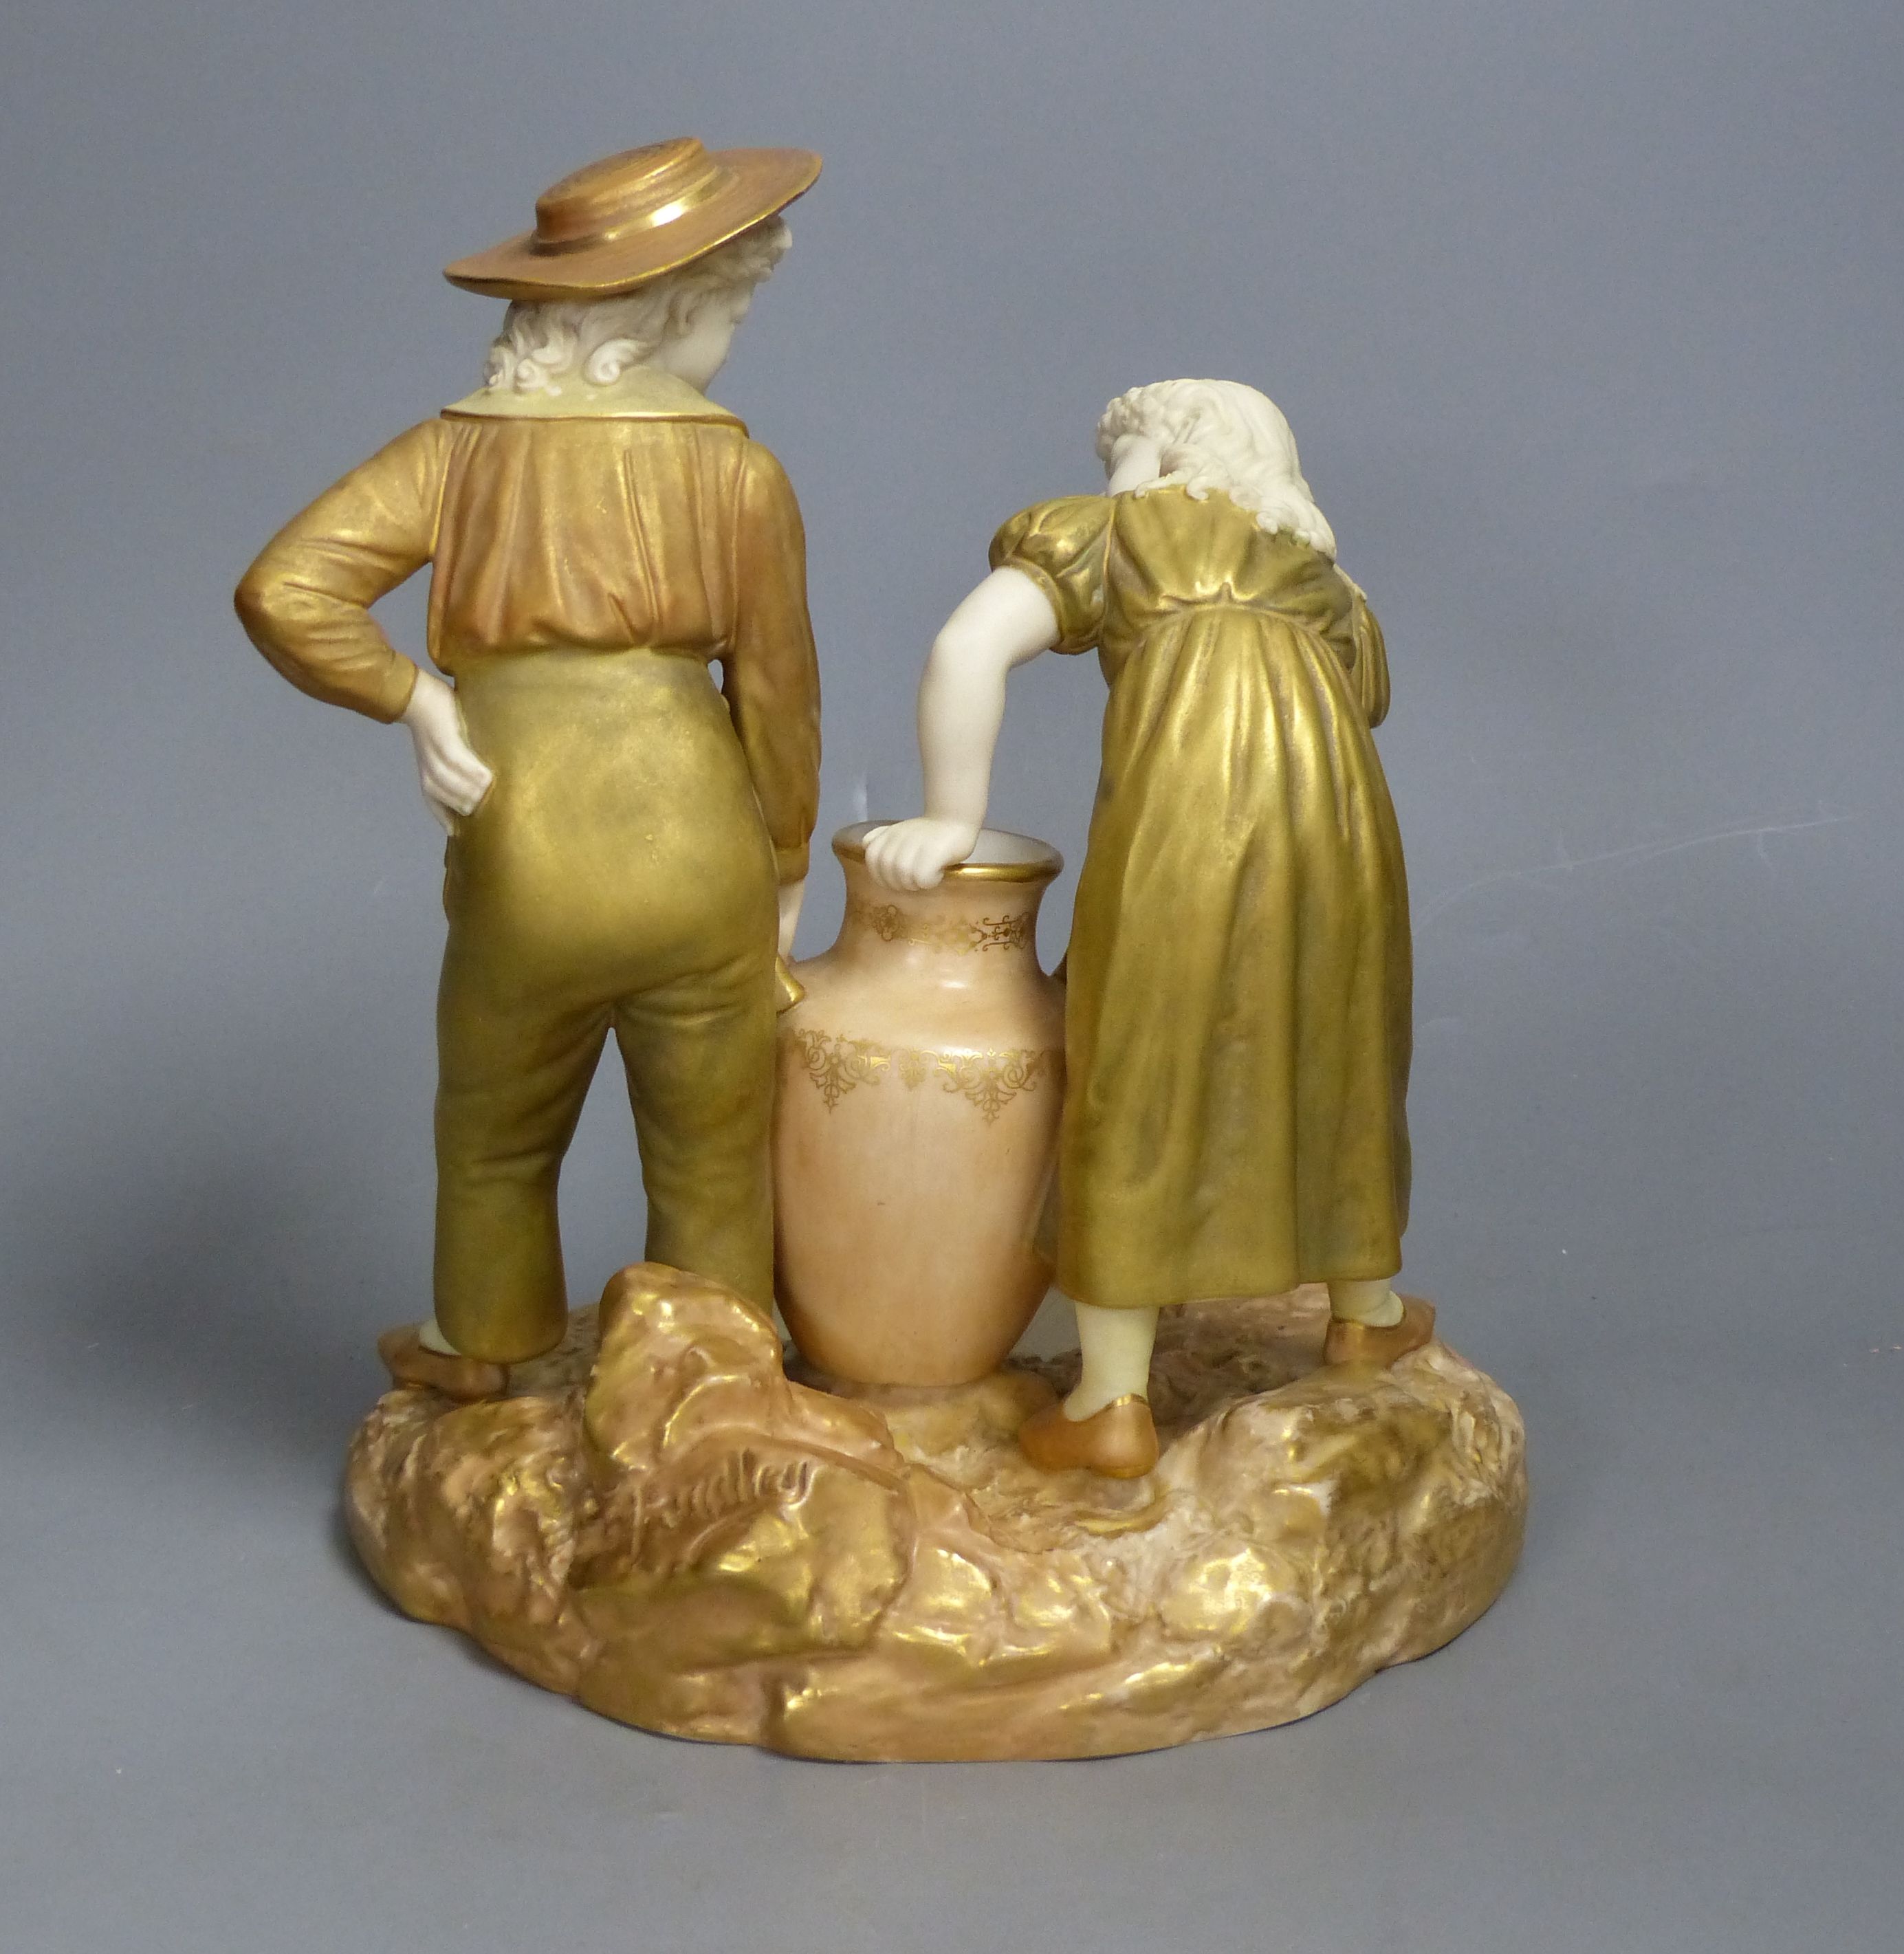 A Royal Worcester group of a boy and a girl, date code for 1917, height 24cm